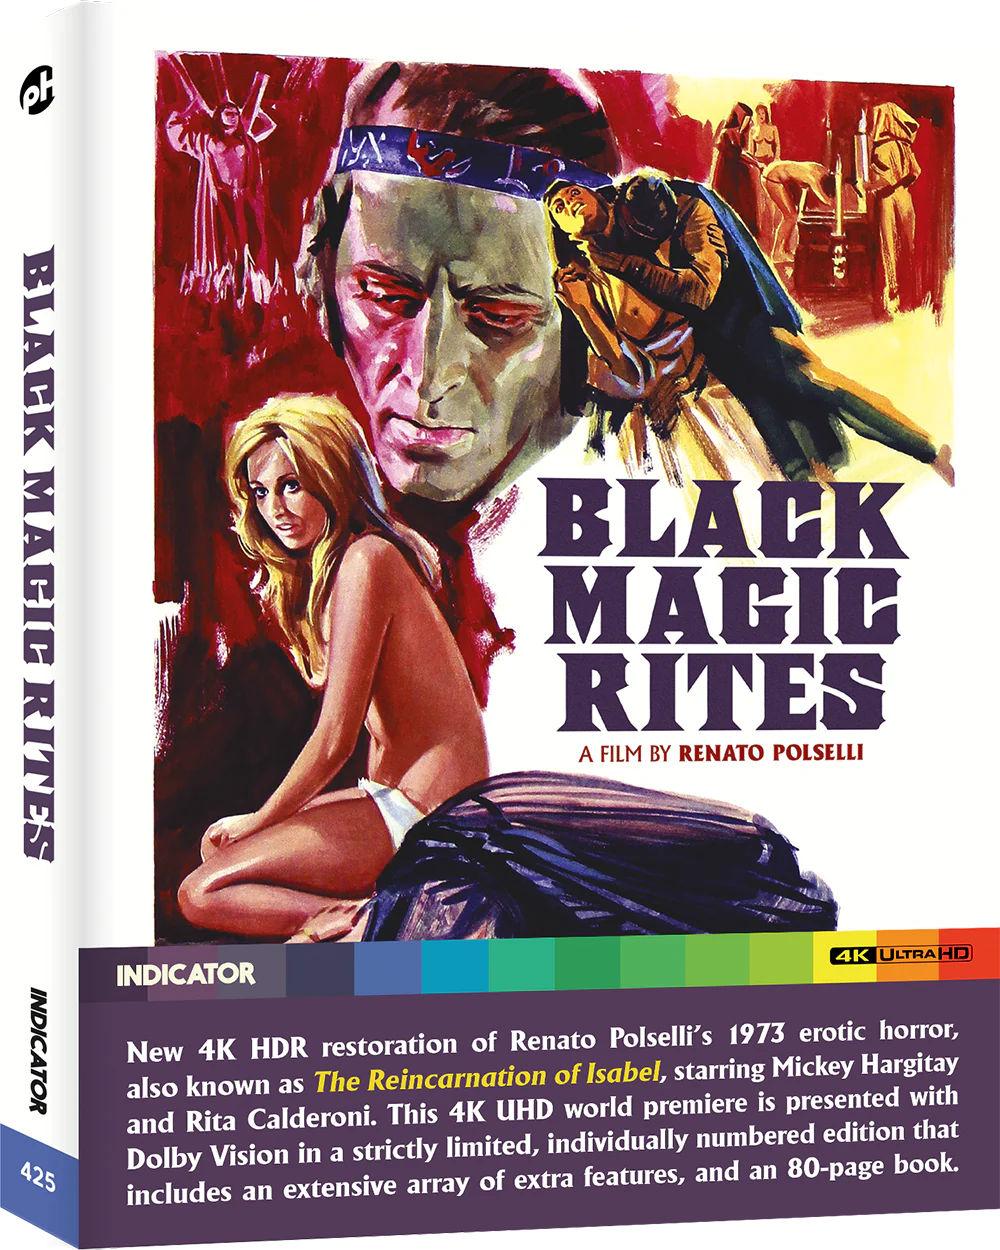 Cover Art of the 4k HDR release of Black Magic Rites